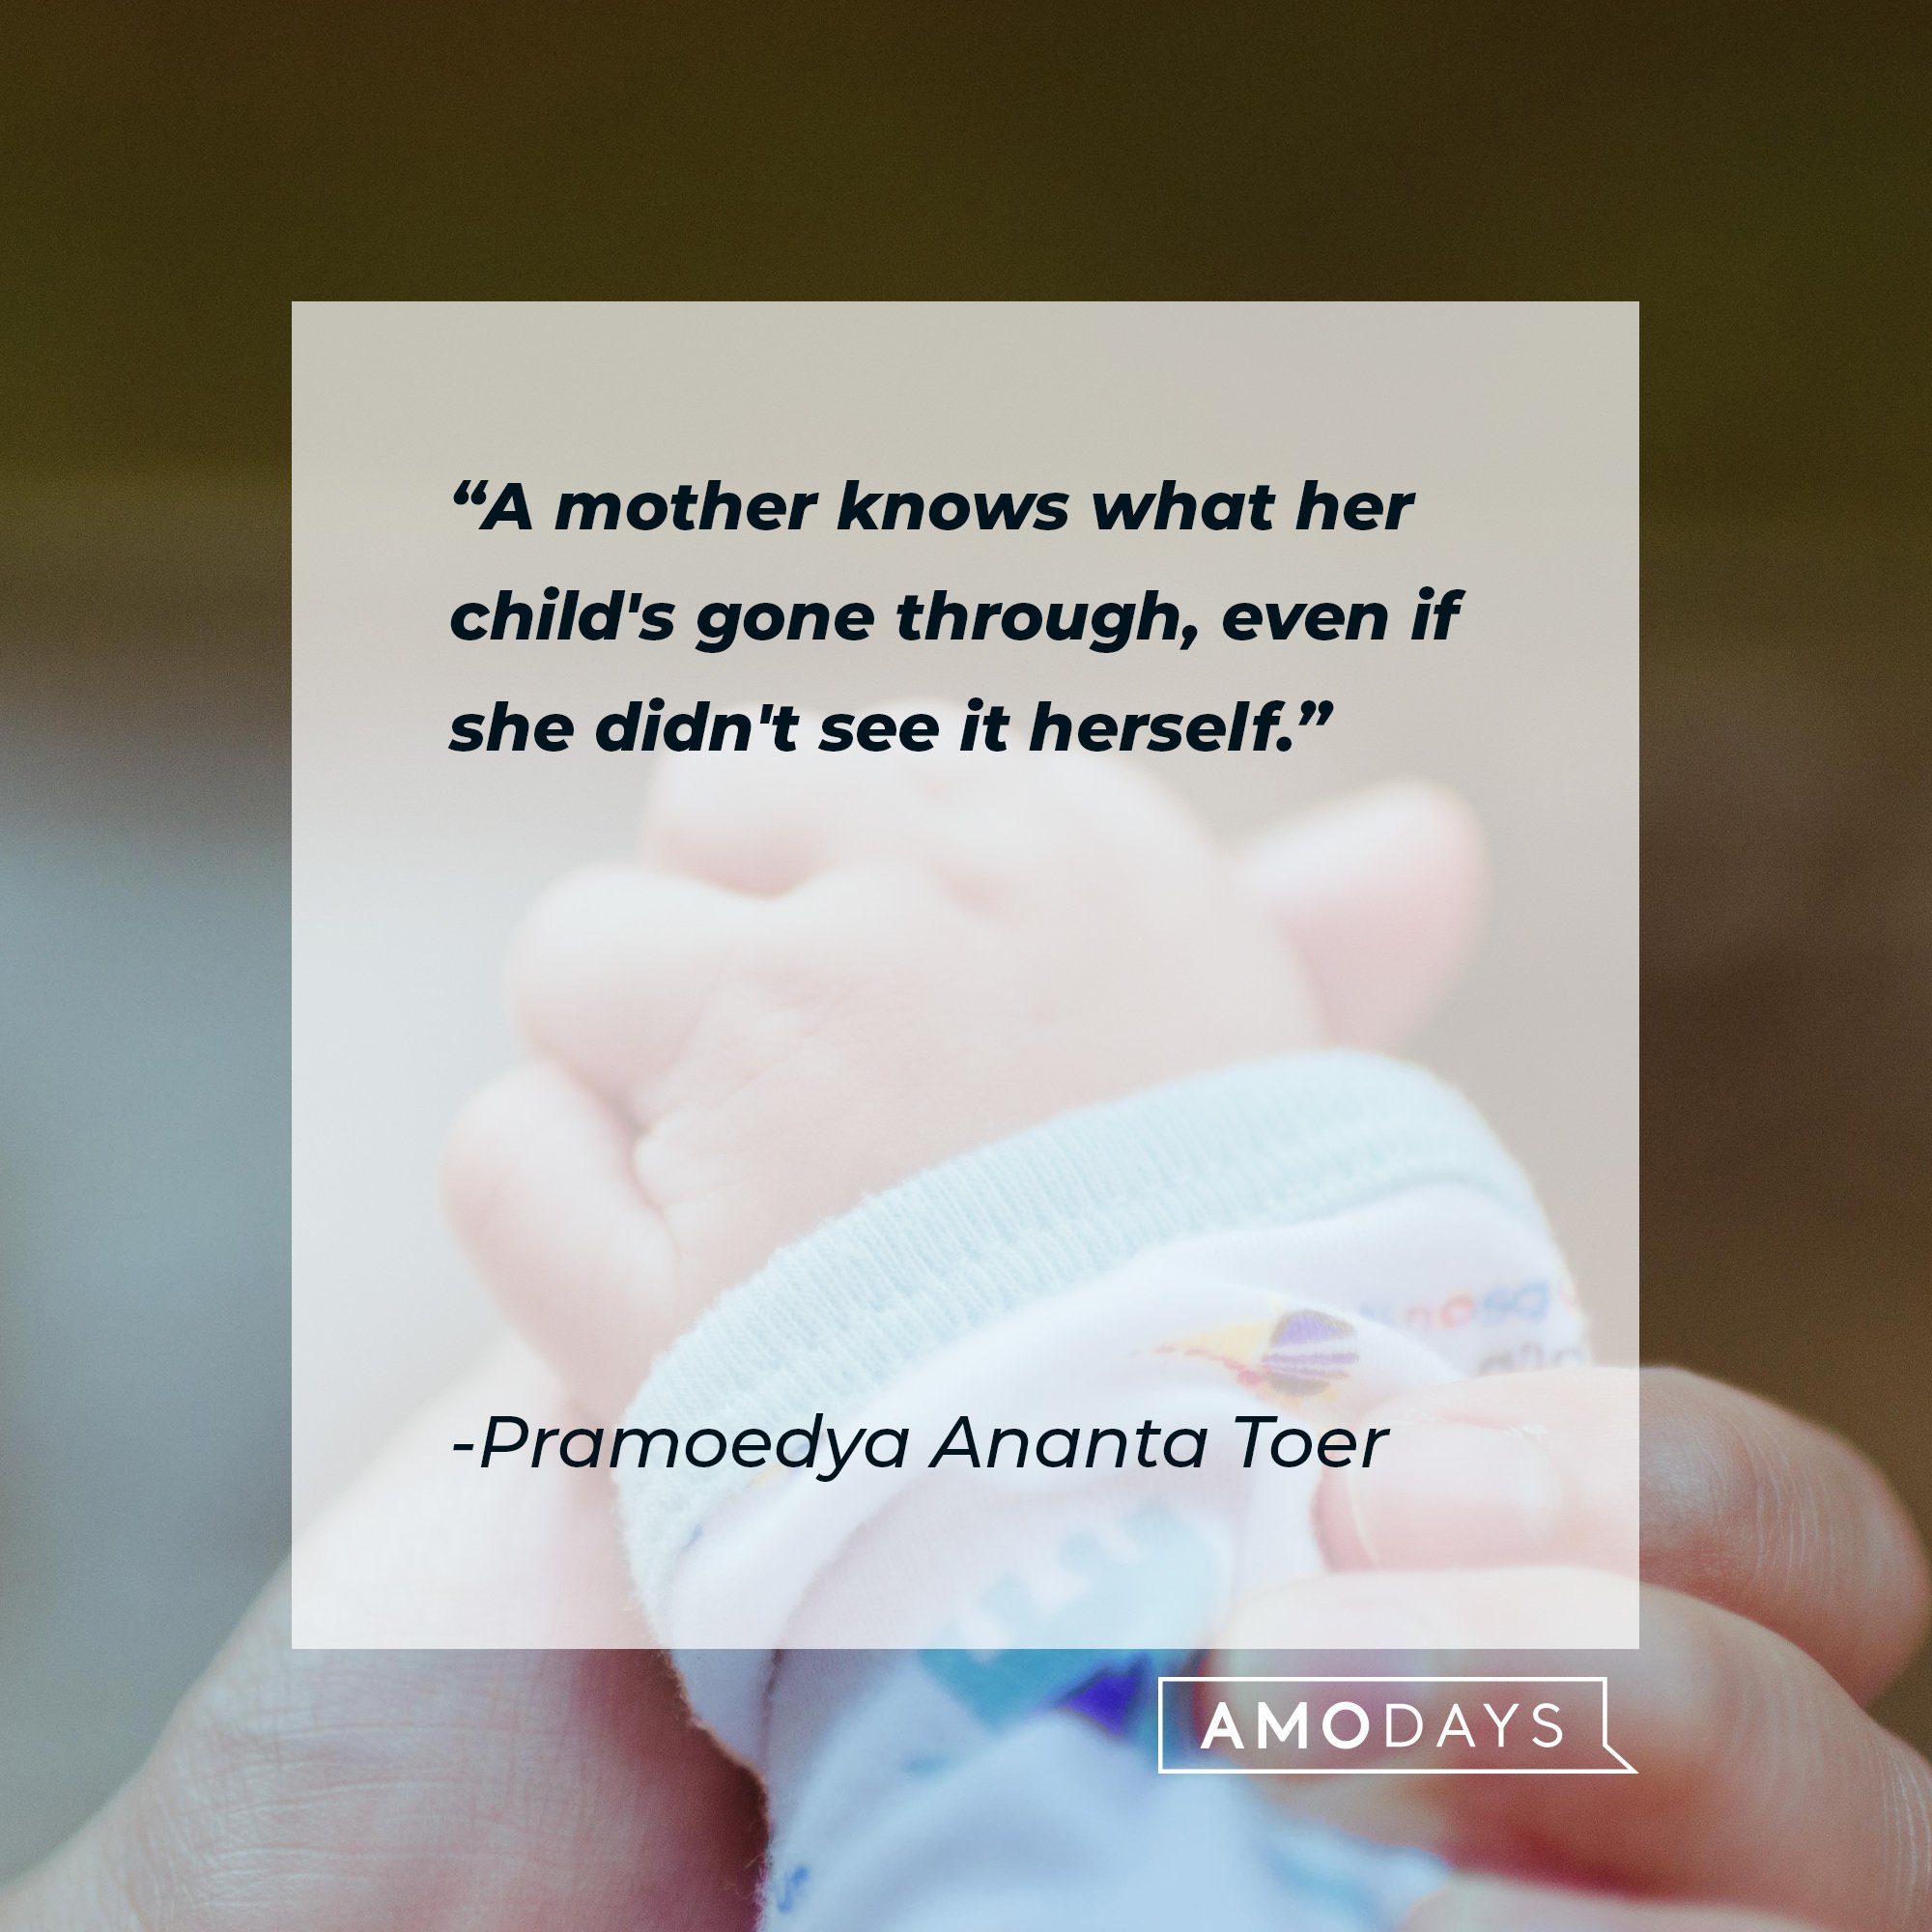 Pramoedya Ananta Toer's quote: "A mother knows what her child's gone through, even if she didn't see it herself." | Image: AmoDays